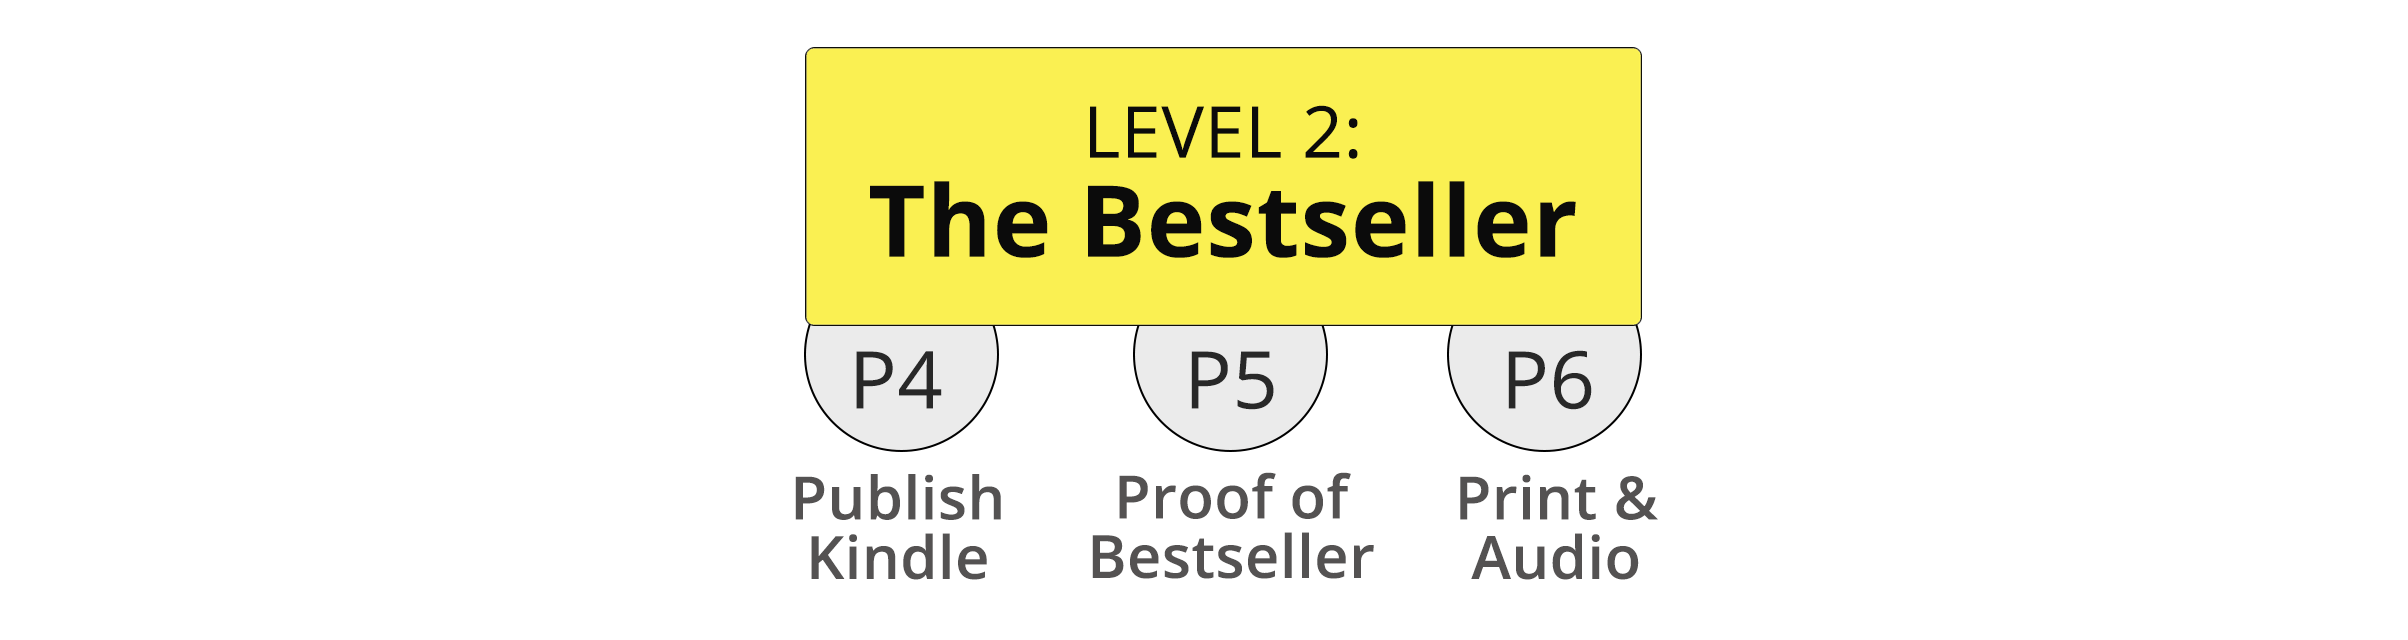 LEVEL 2 bestselling book blueprint updated new